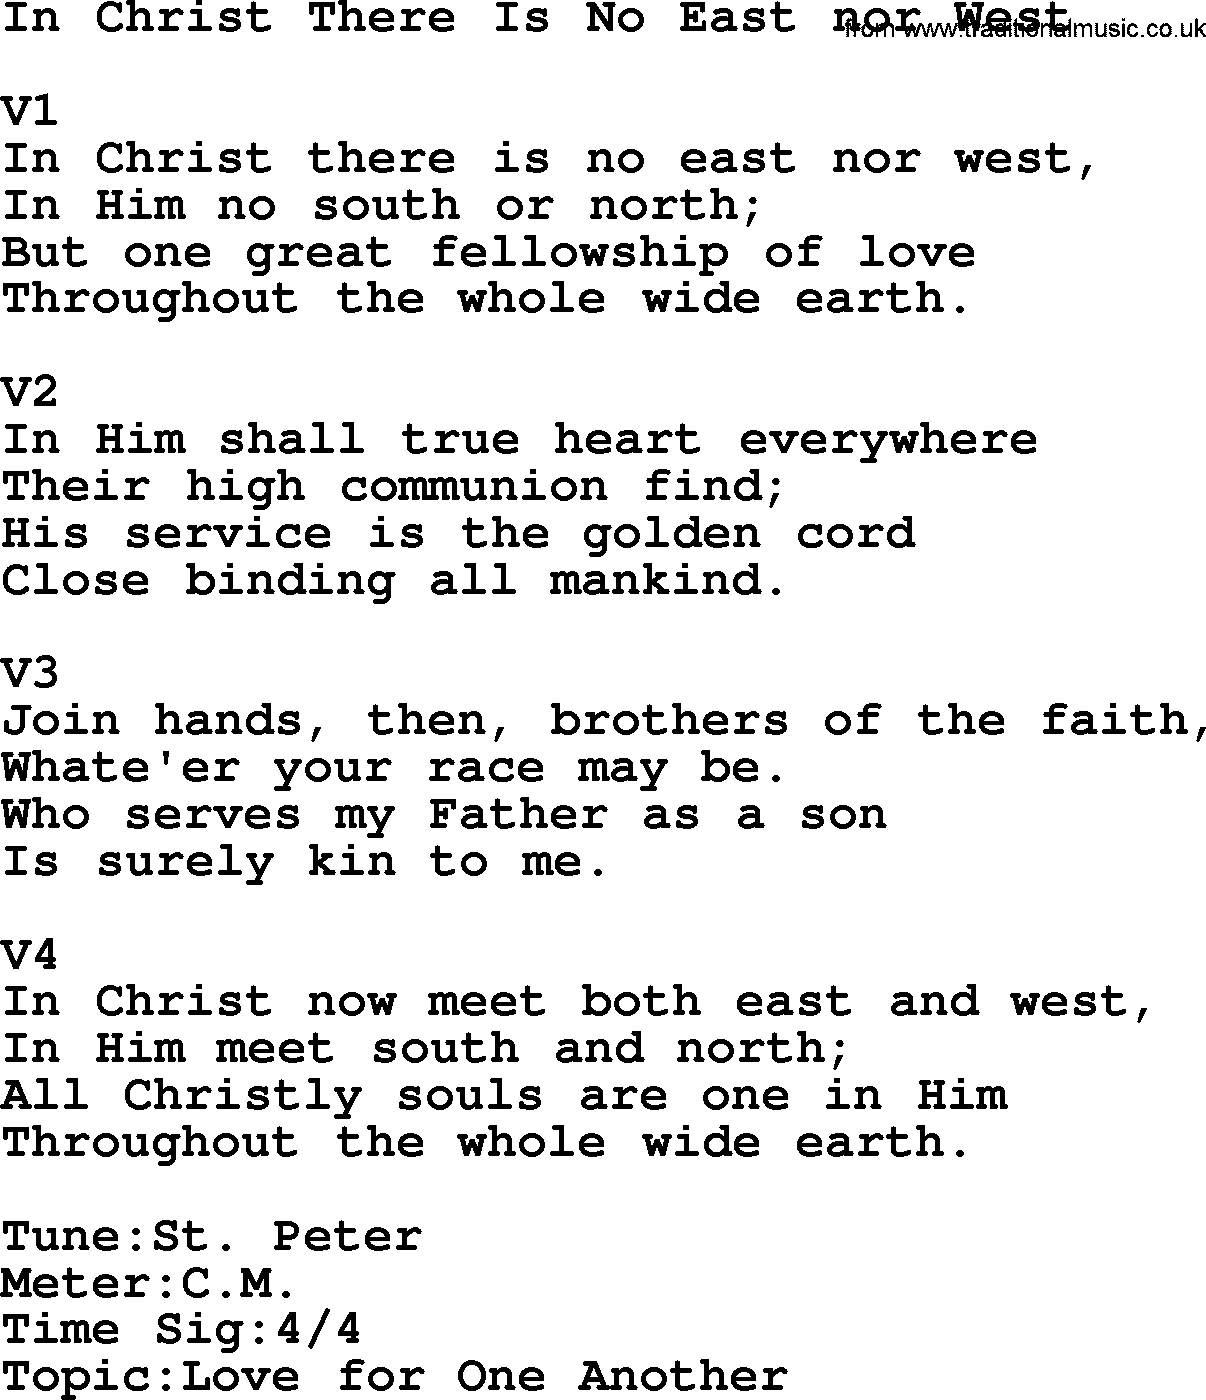 Adventist Hynms collection, Hymn: In Christ There Is No East Nor West, lyrics with PDF